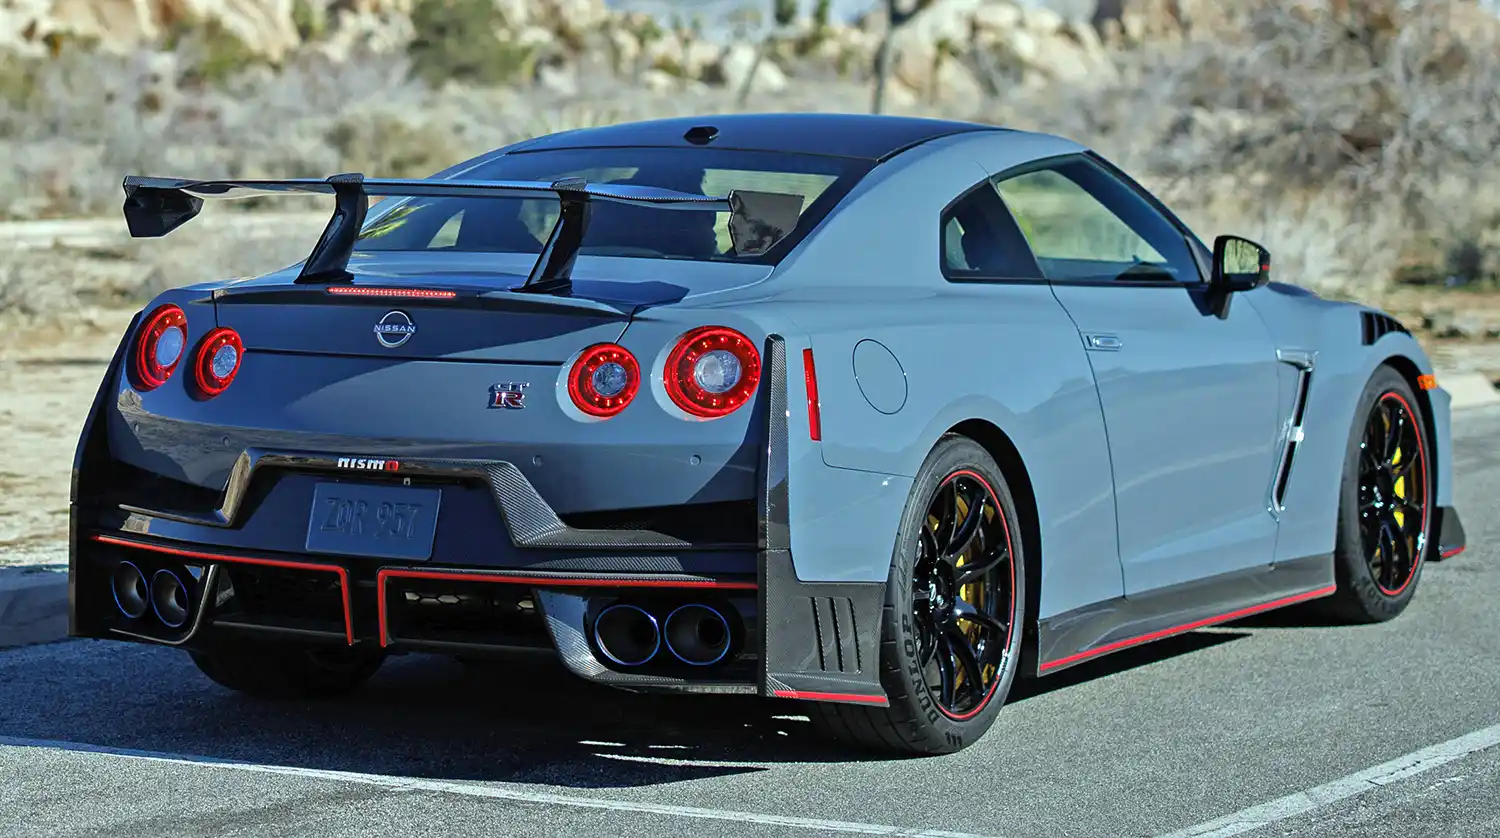 2024 Nissan GT-R Pricing Detailed; Premium, T-Spec and NISMO… Oh